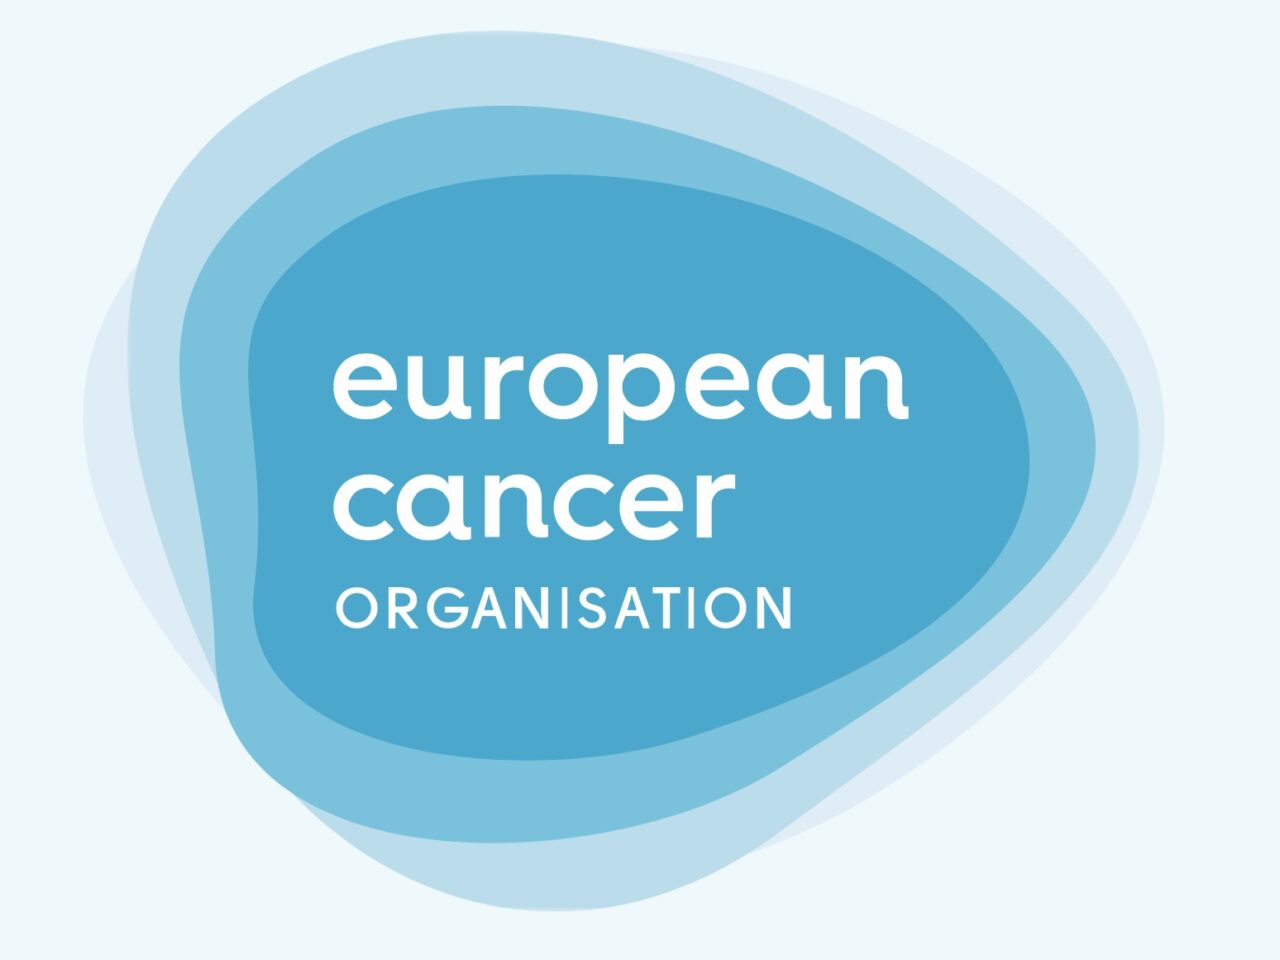 Jemma Arakelyan: The European Cancer Organisation has initiated a new special Emergencies and Crisis Network